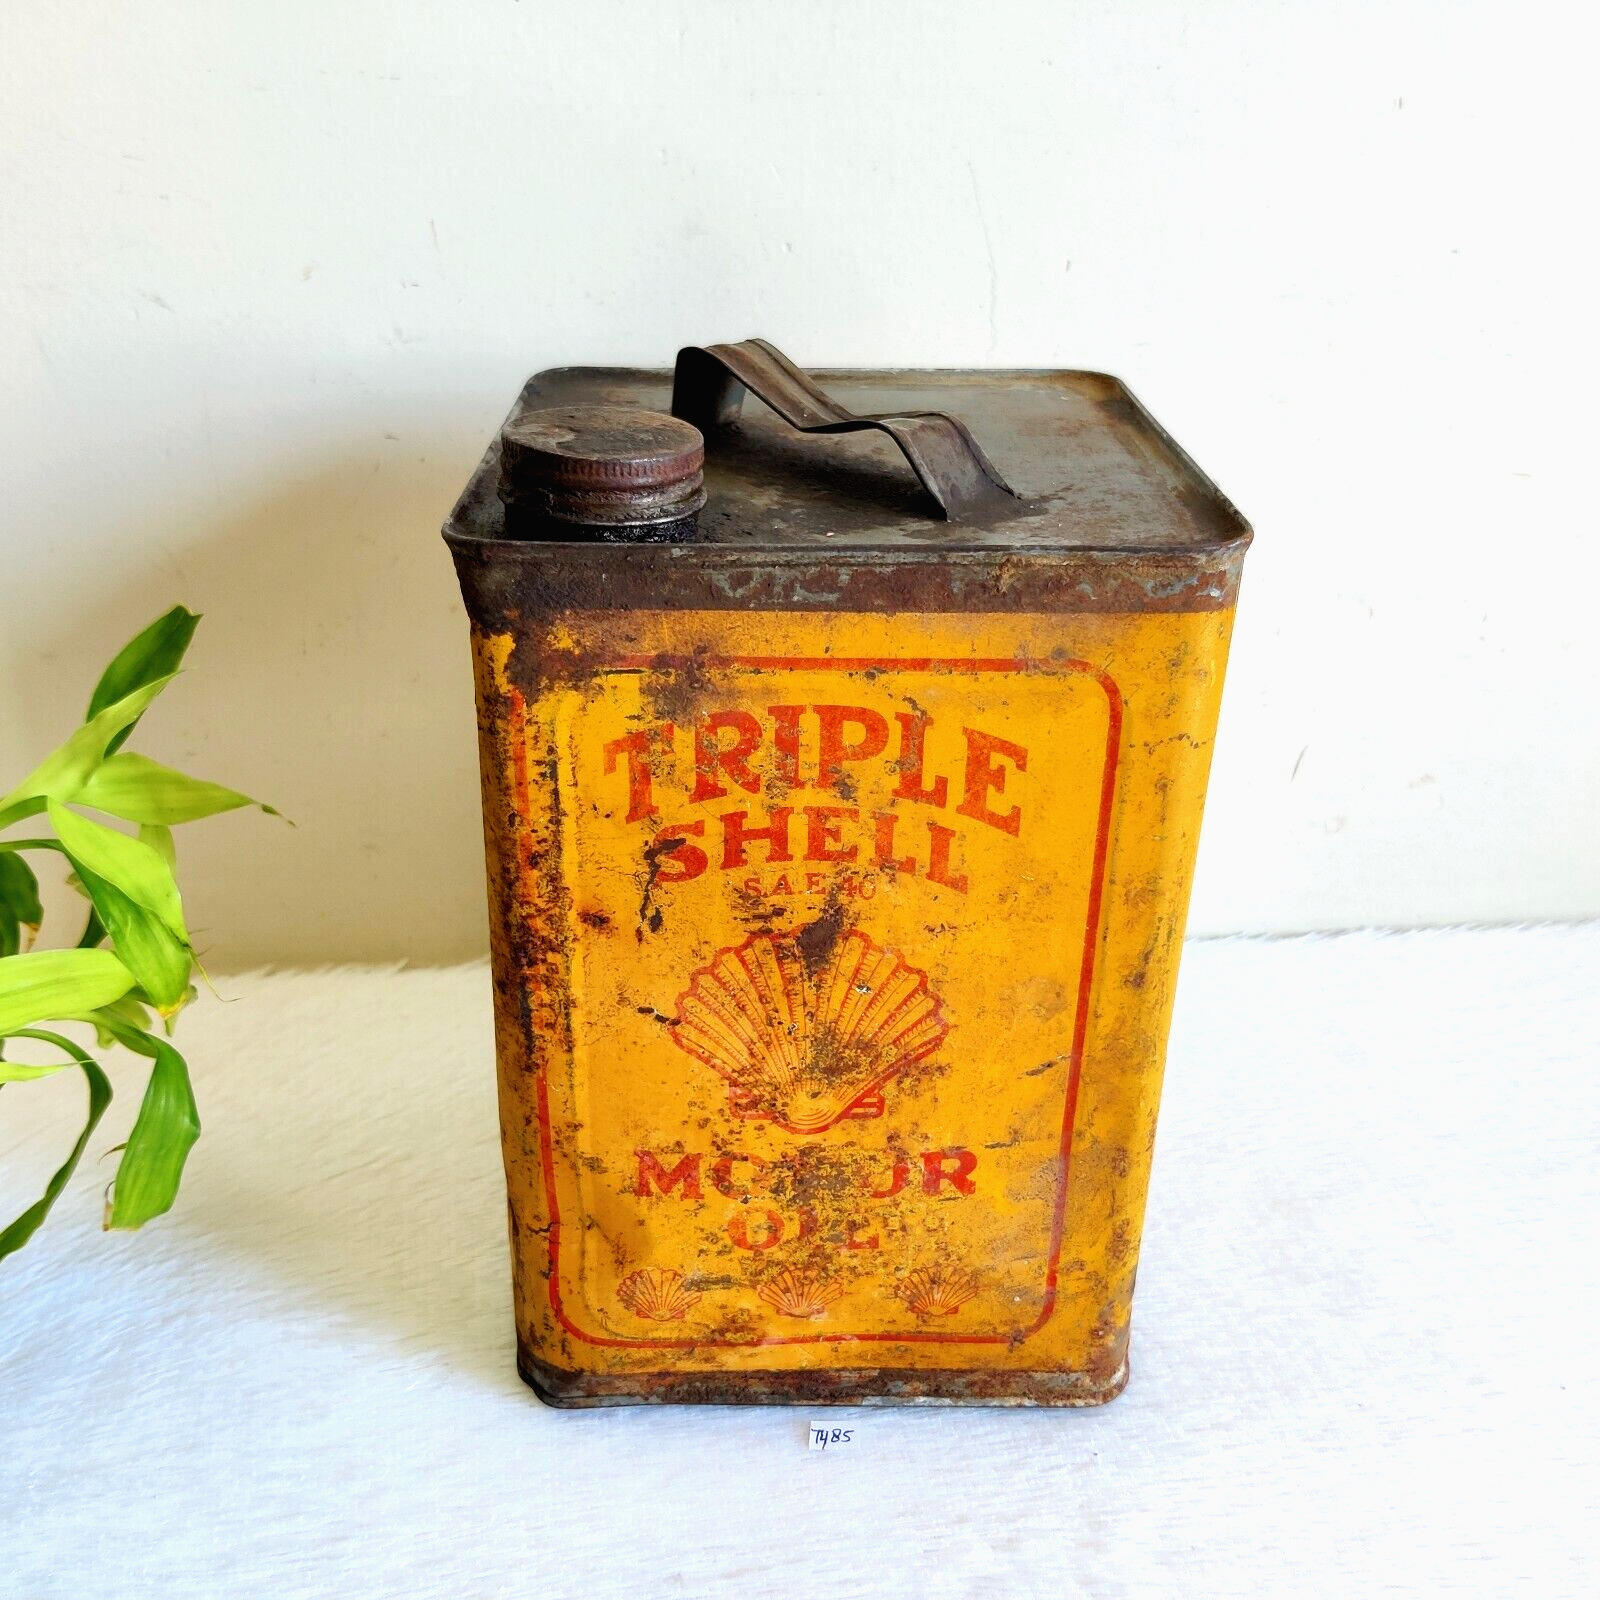 1920s Vintage Triple Shell Motor Oil Advertising Tin Can Rare Collectible T485